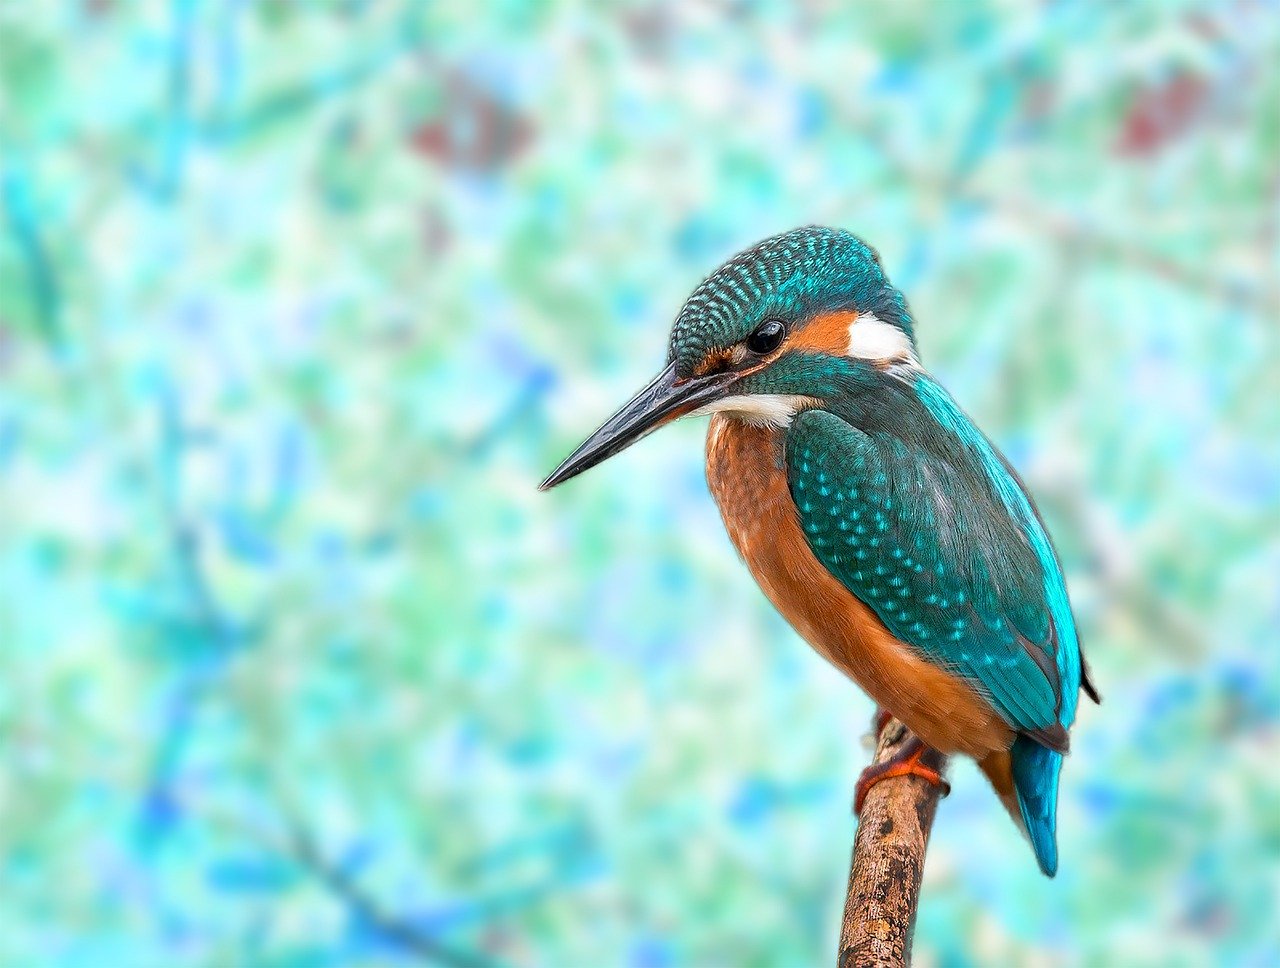 Kingfisher for CAPS with thanks to Pixabay